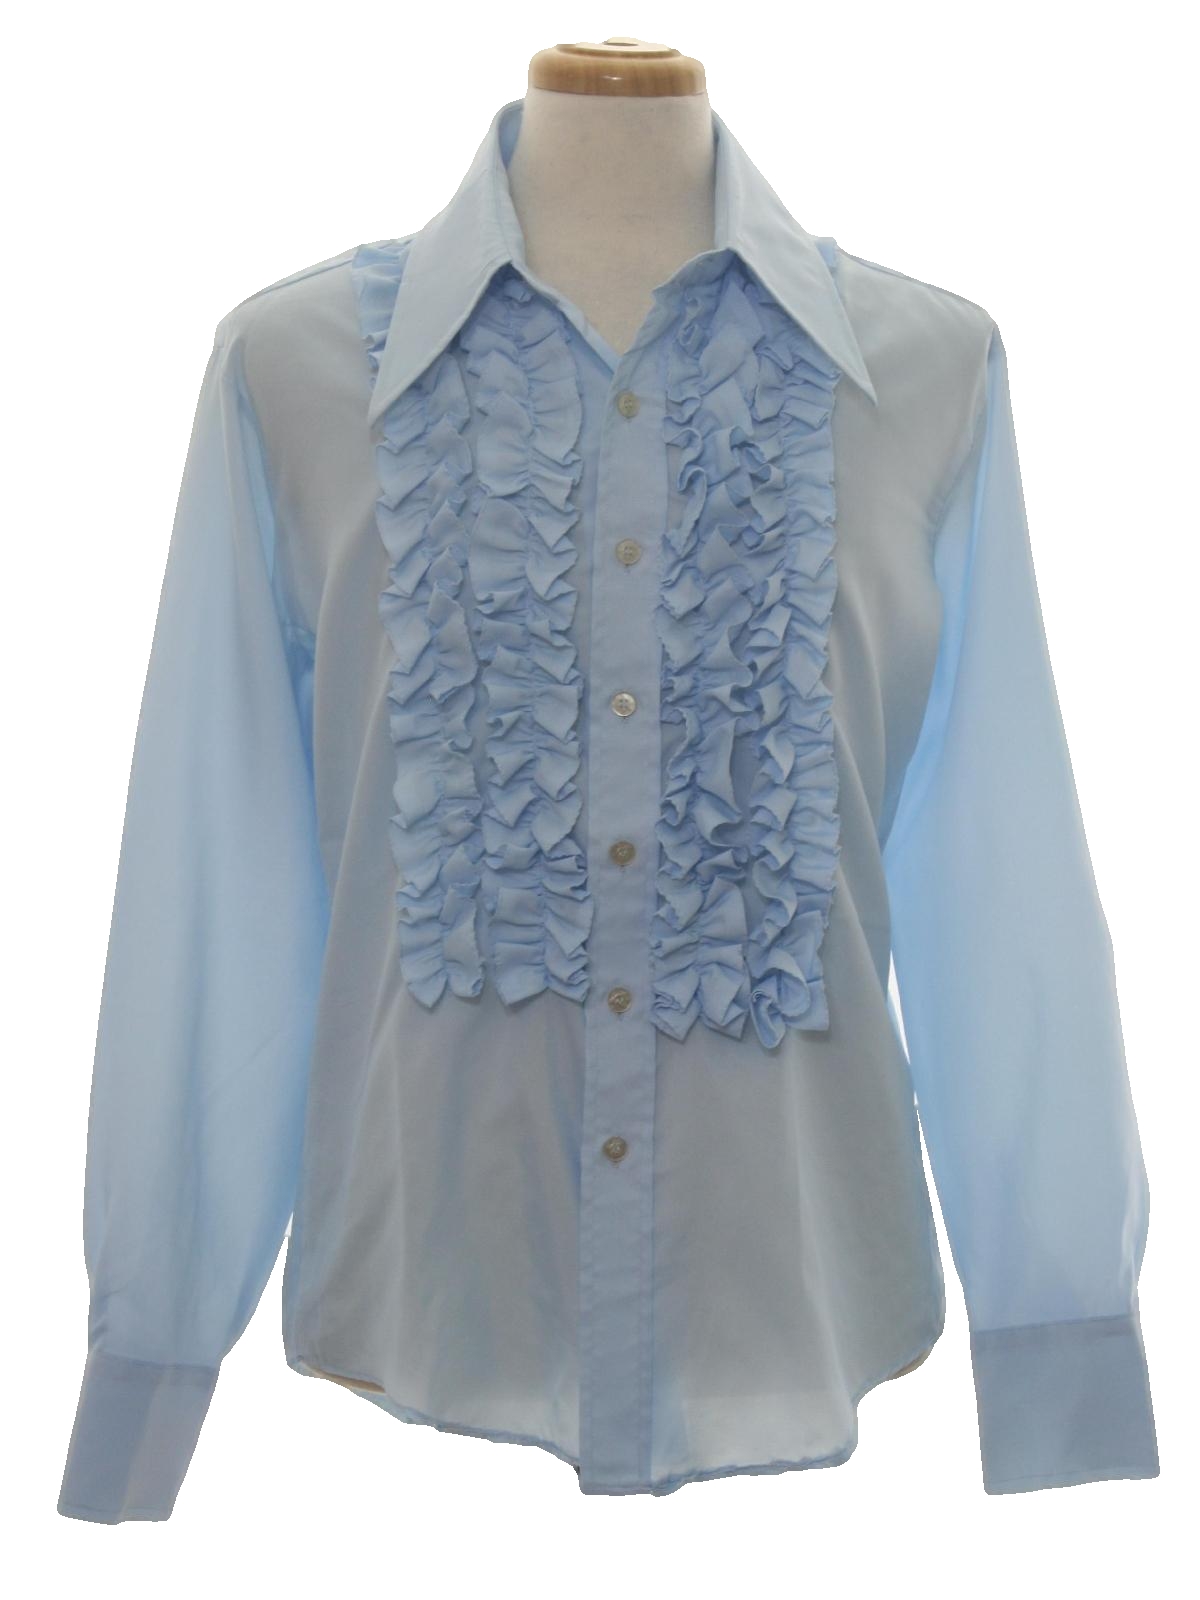 Retro 1970s Shirt: 70s -Concept 2 by Campus- Mens baby blue background ...